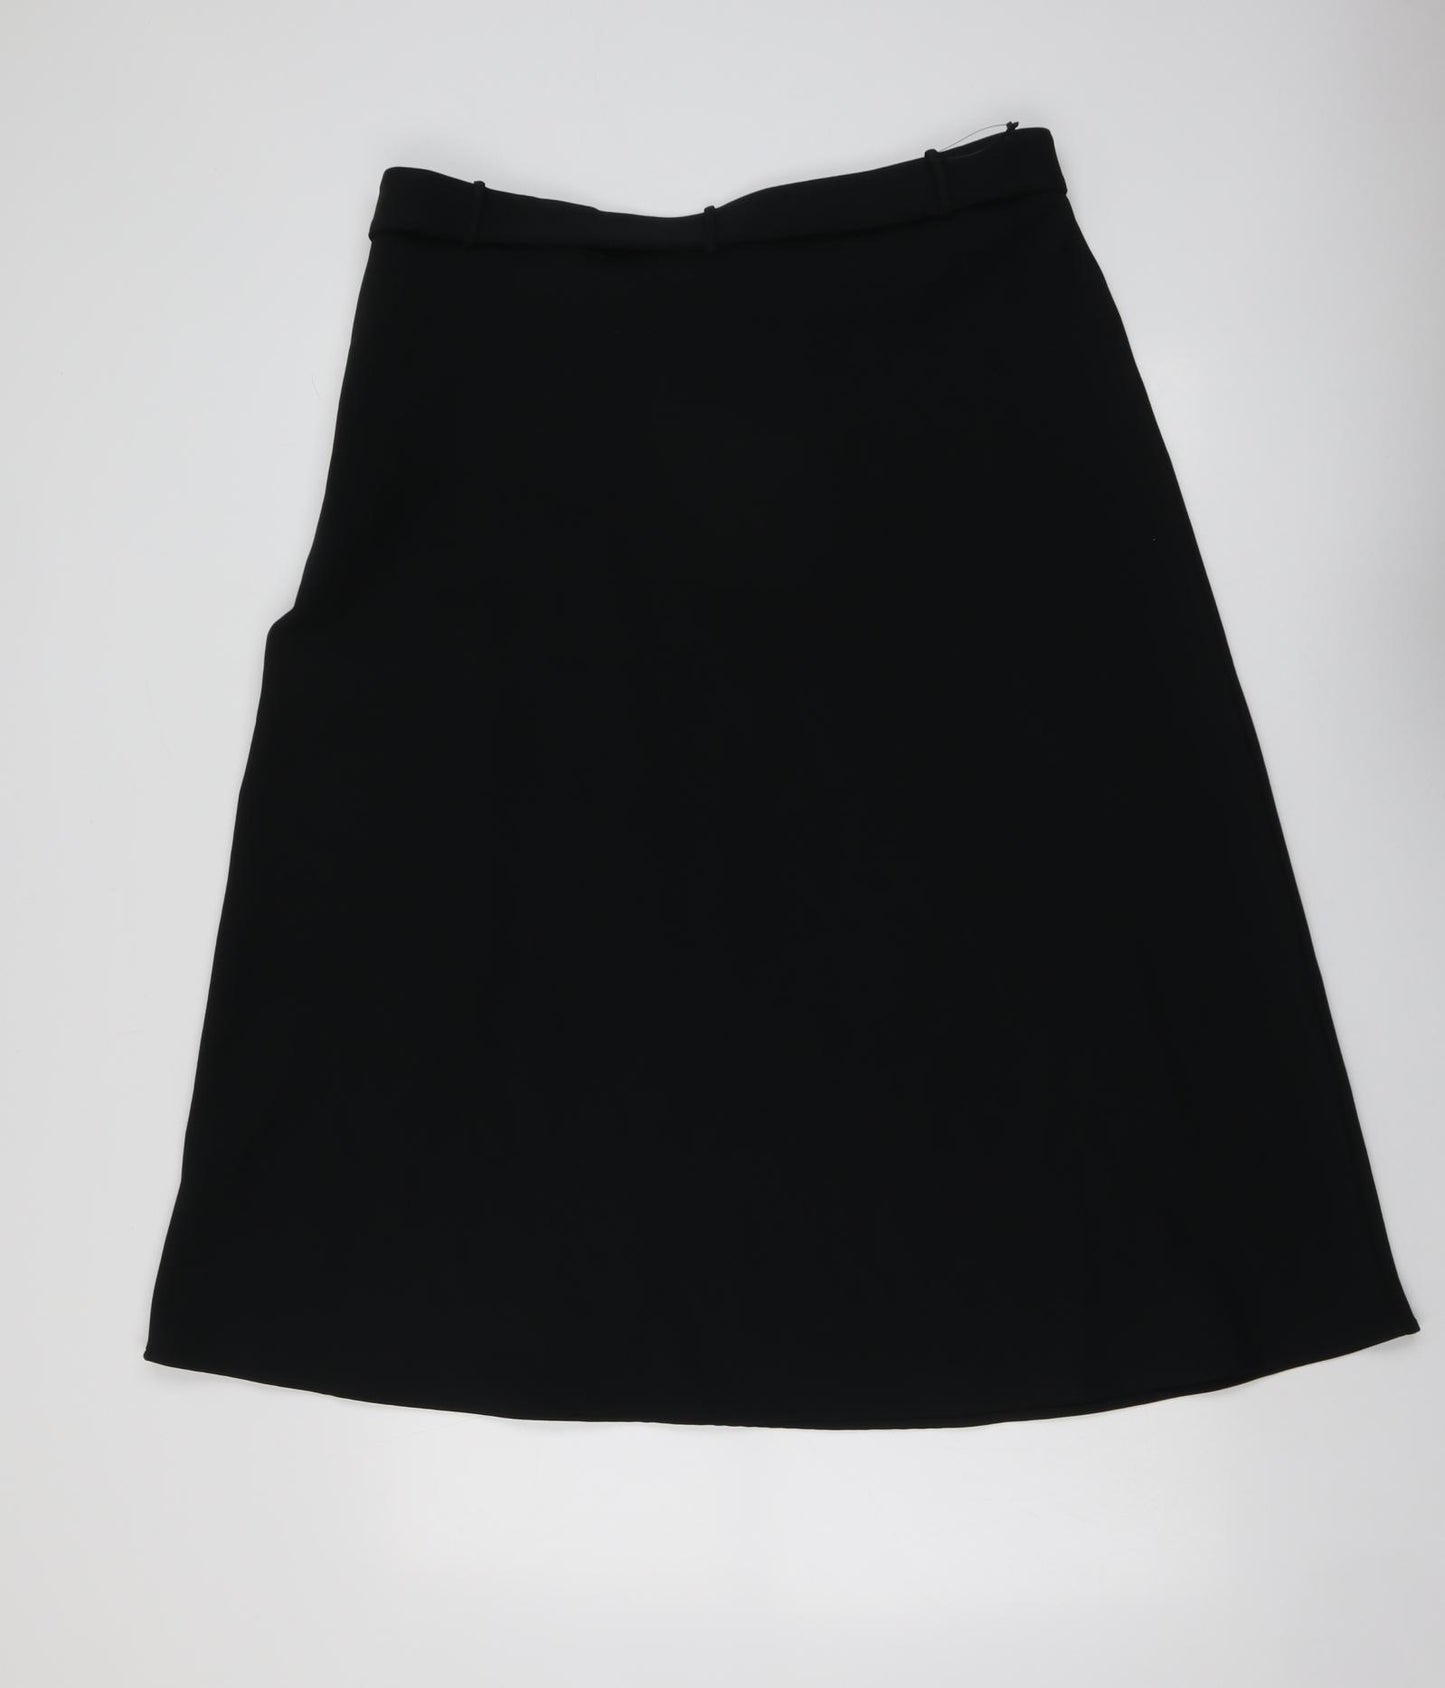 Marks and Spencer Womens Black Polyester Straight & Pencil Skirt Size 16 Zip - Belt Included